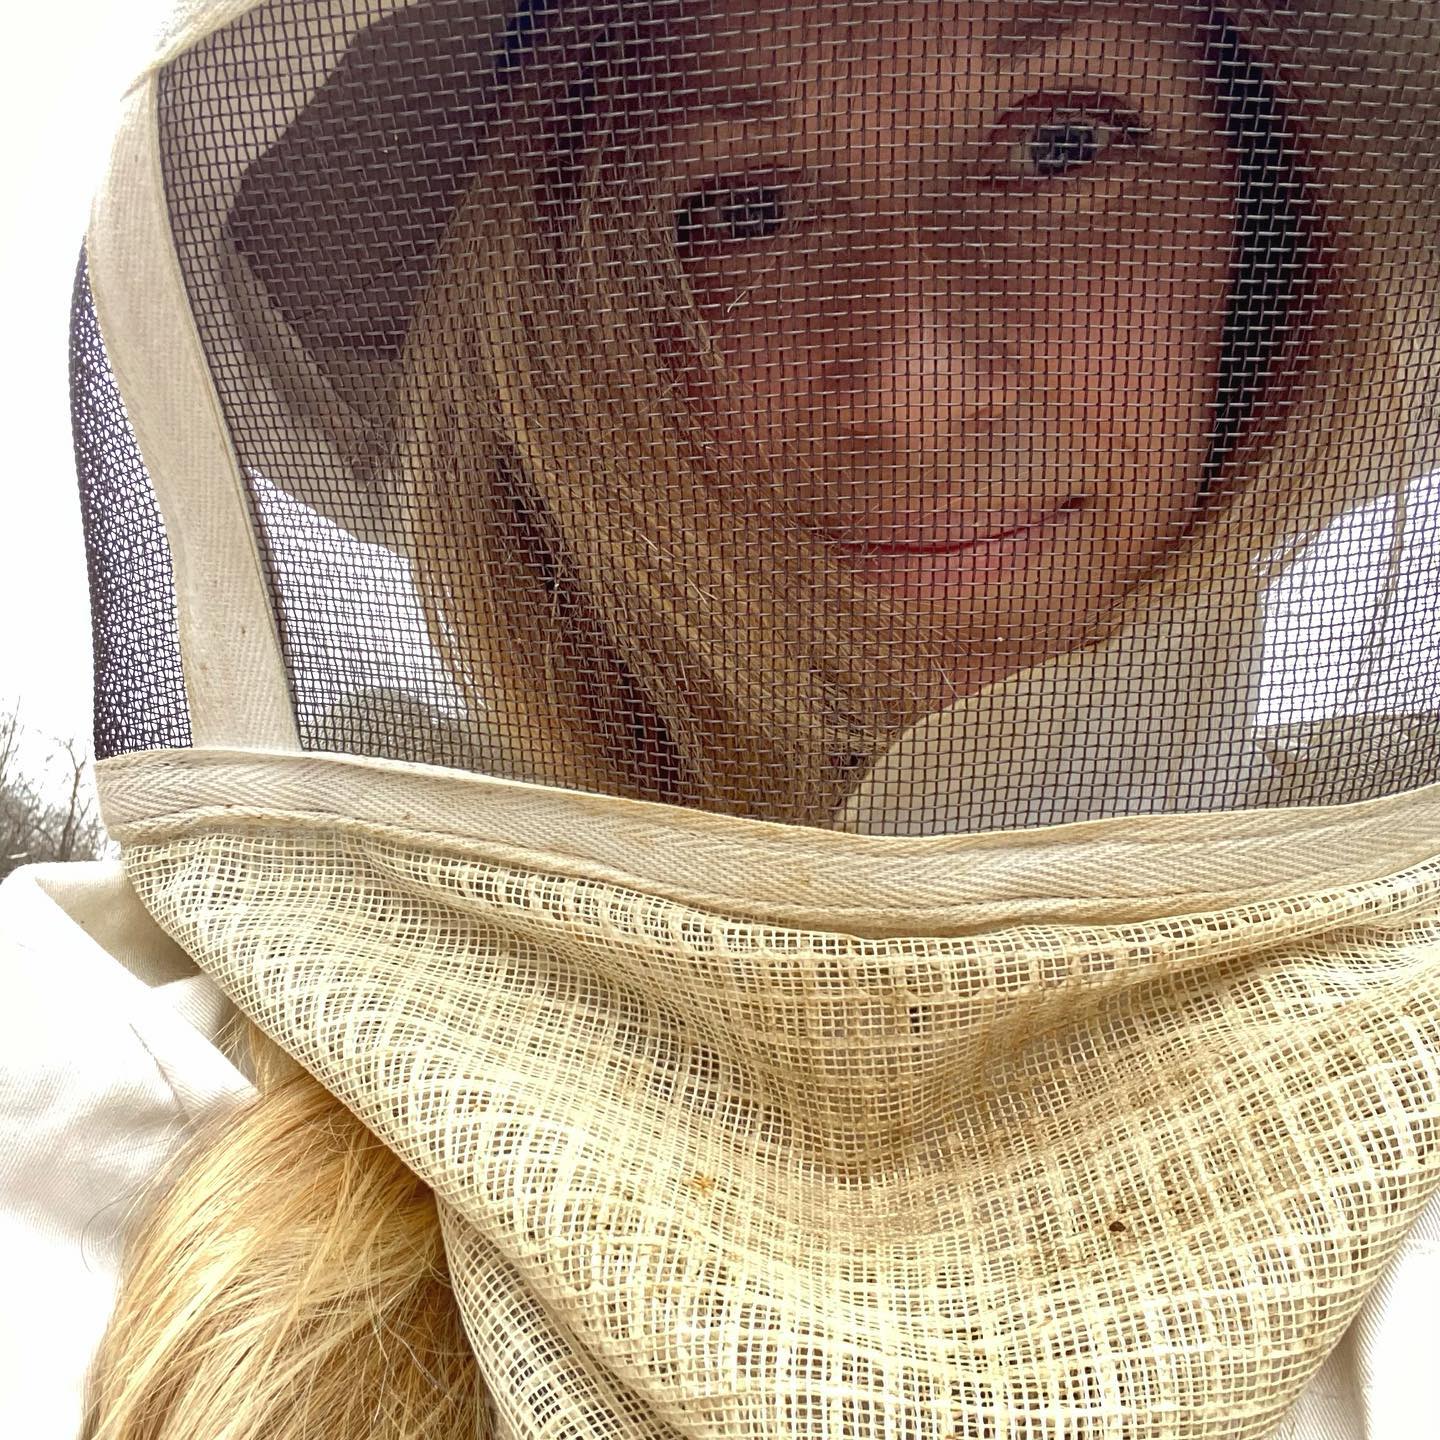 Goodbye, 2021… I hope you’re not the last Dec 31 that I spend beekeeping. Anyone else enjoying the uncharacteristic weather? Or are you discerning your resolutions, words, or saints for 2022? My plans: finish checking these bees and kiss my honey bear at midnight. 😘 #nye  #beekeeping #wordslikehoney